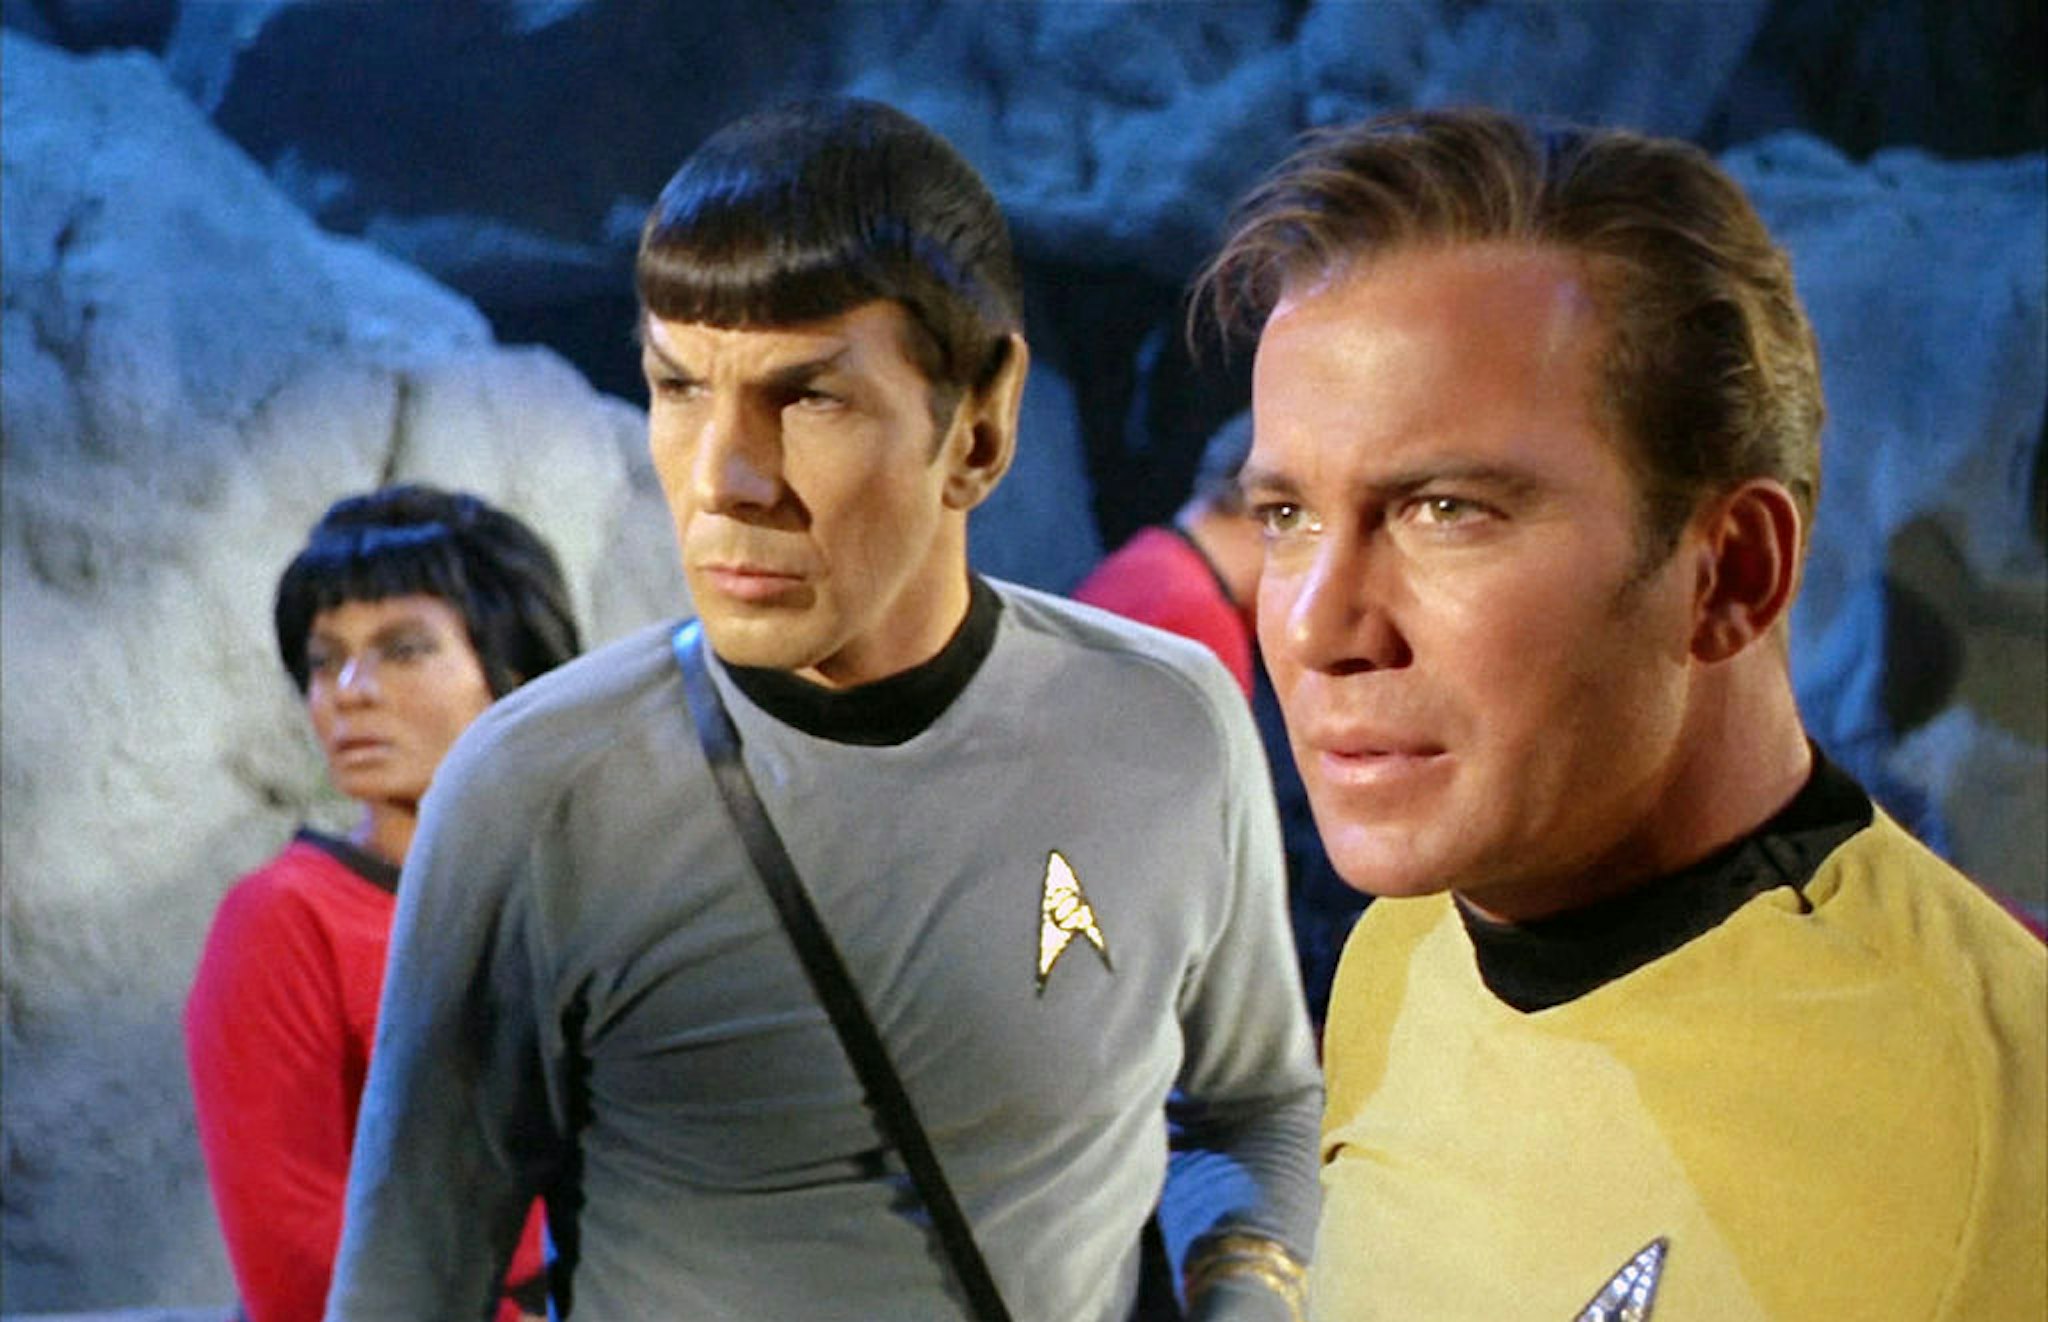 From left: Nichelle Nichols as Lt. Nyota Uhura, Leonard Nimoy as Mr. Spock and William Shatner as Captain James T. Kirk in the STAR TREK: THE ORIGINAL SERIES episode, "The City on the Edge of Forever." Original air date, April 6, 1967. Image is a screen grab. (Photo by CBS via Getty Images)